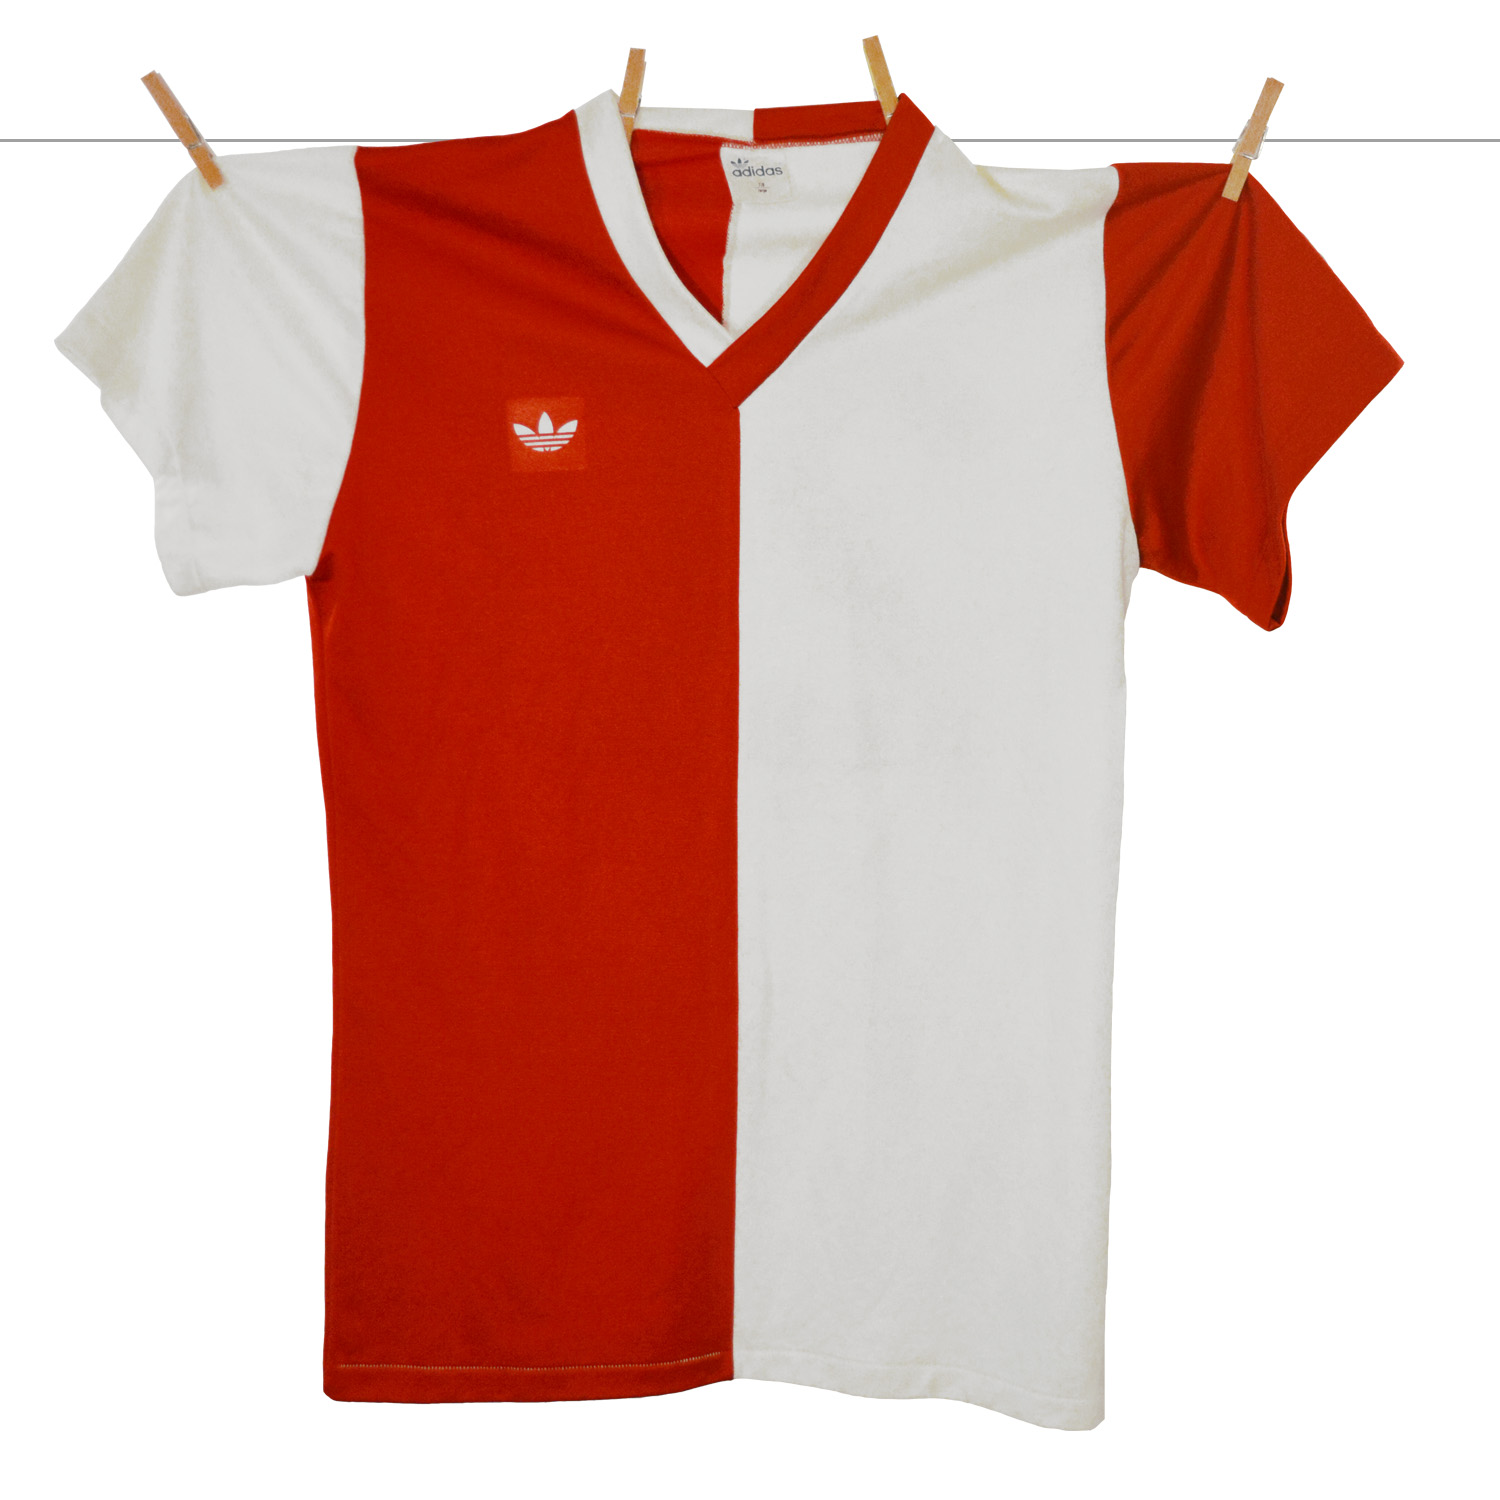 1979 - 1980, Matchworn Adidas Feyenoord thuisshirt Rood-wit, Rugnummer 20, Made in West-Germany